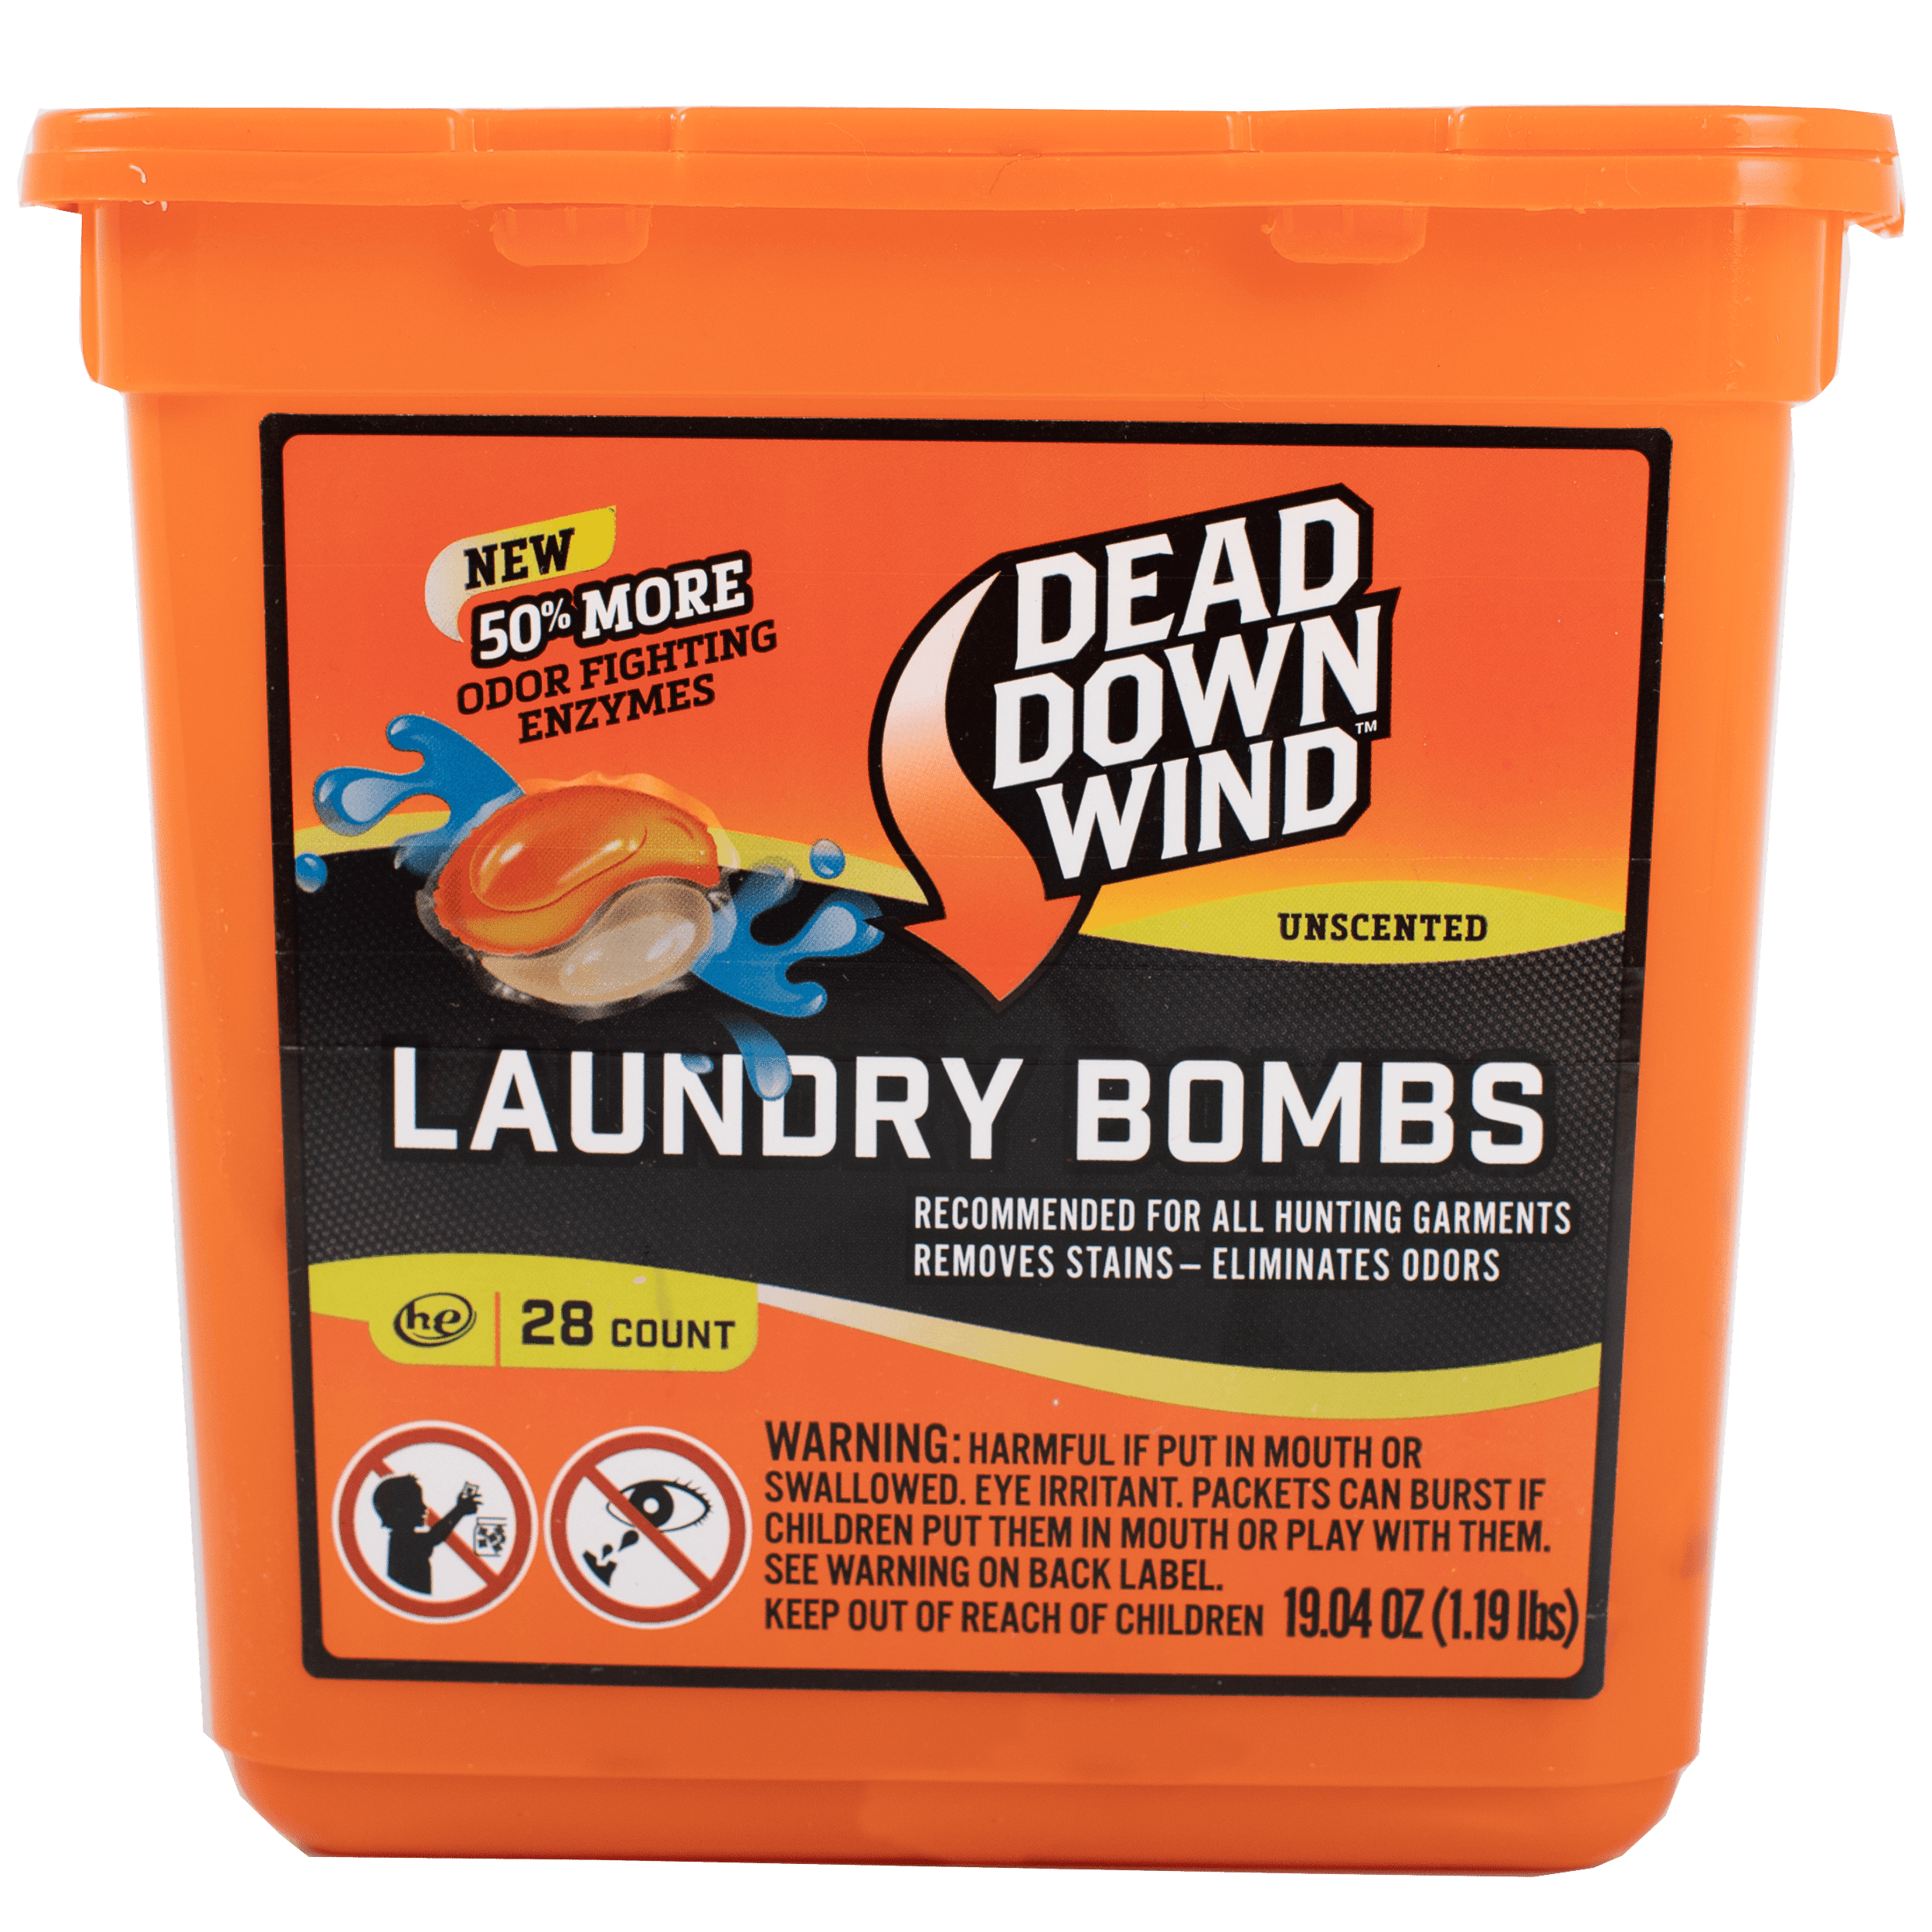 Dead Down Wind Field Wash Clothes 1 Pack